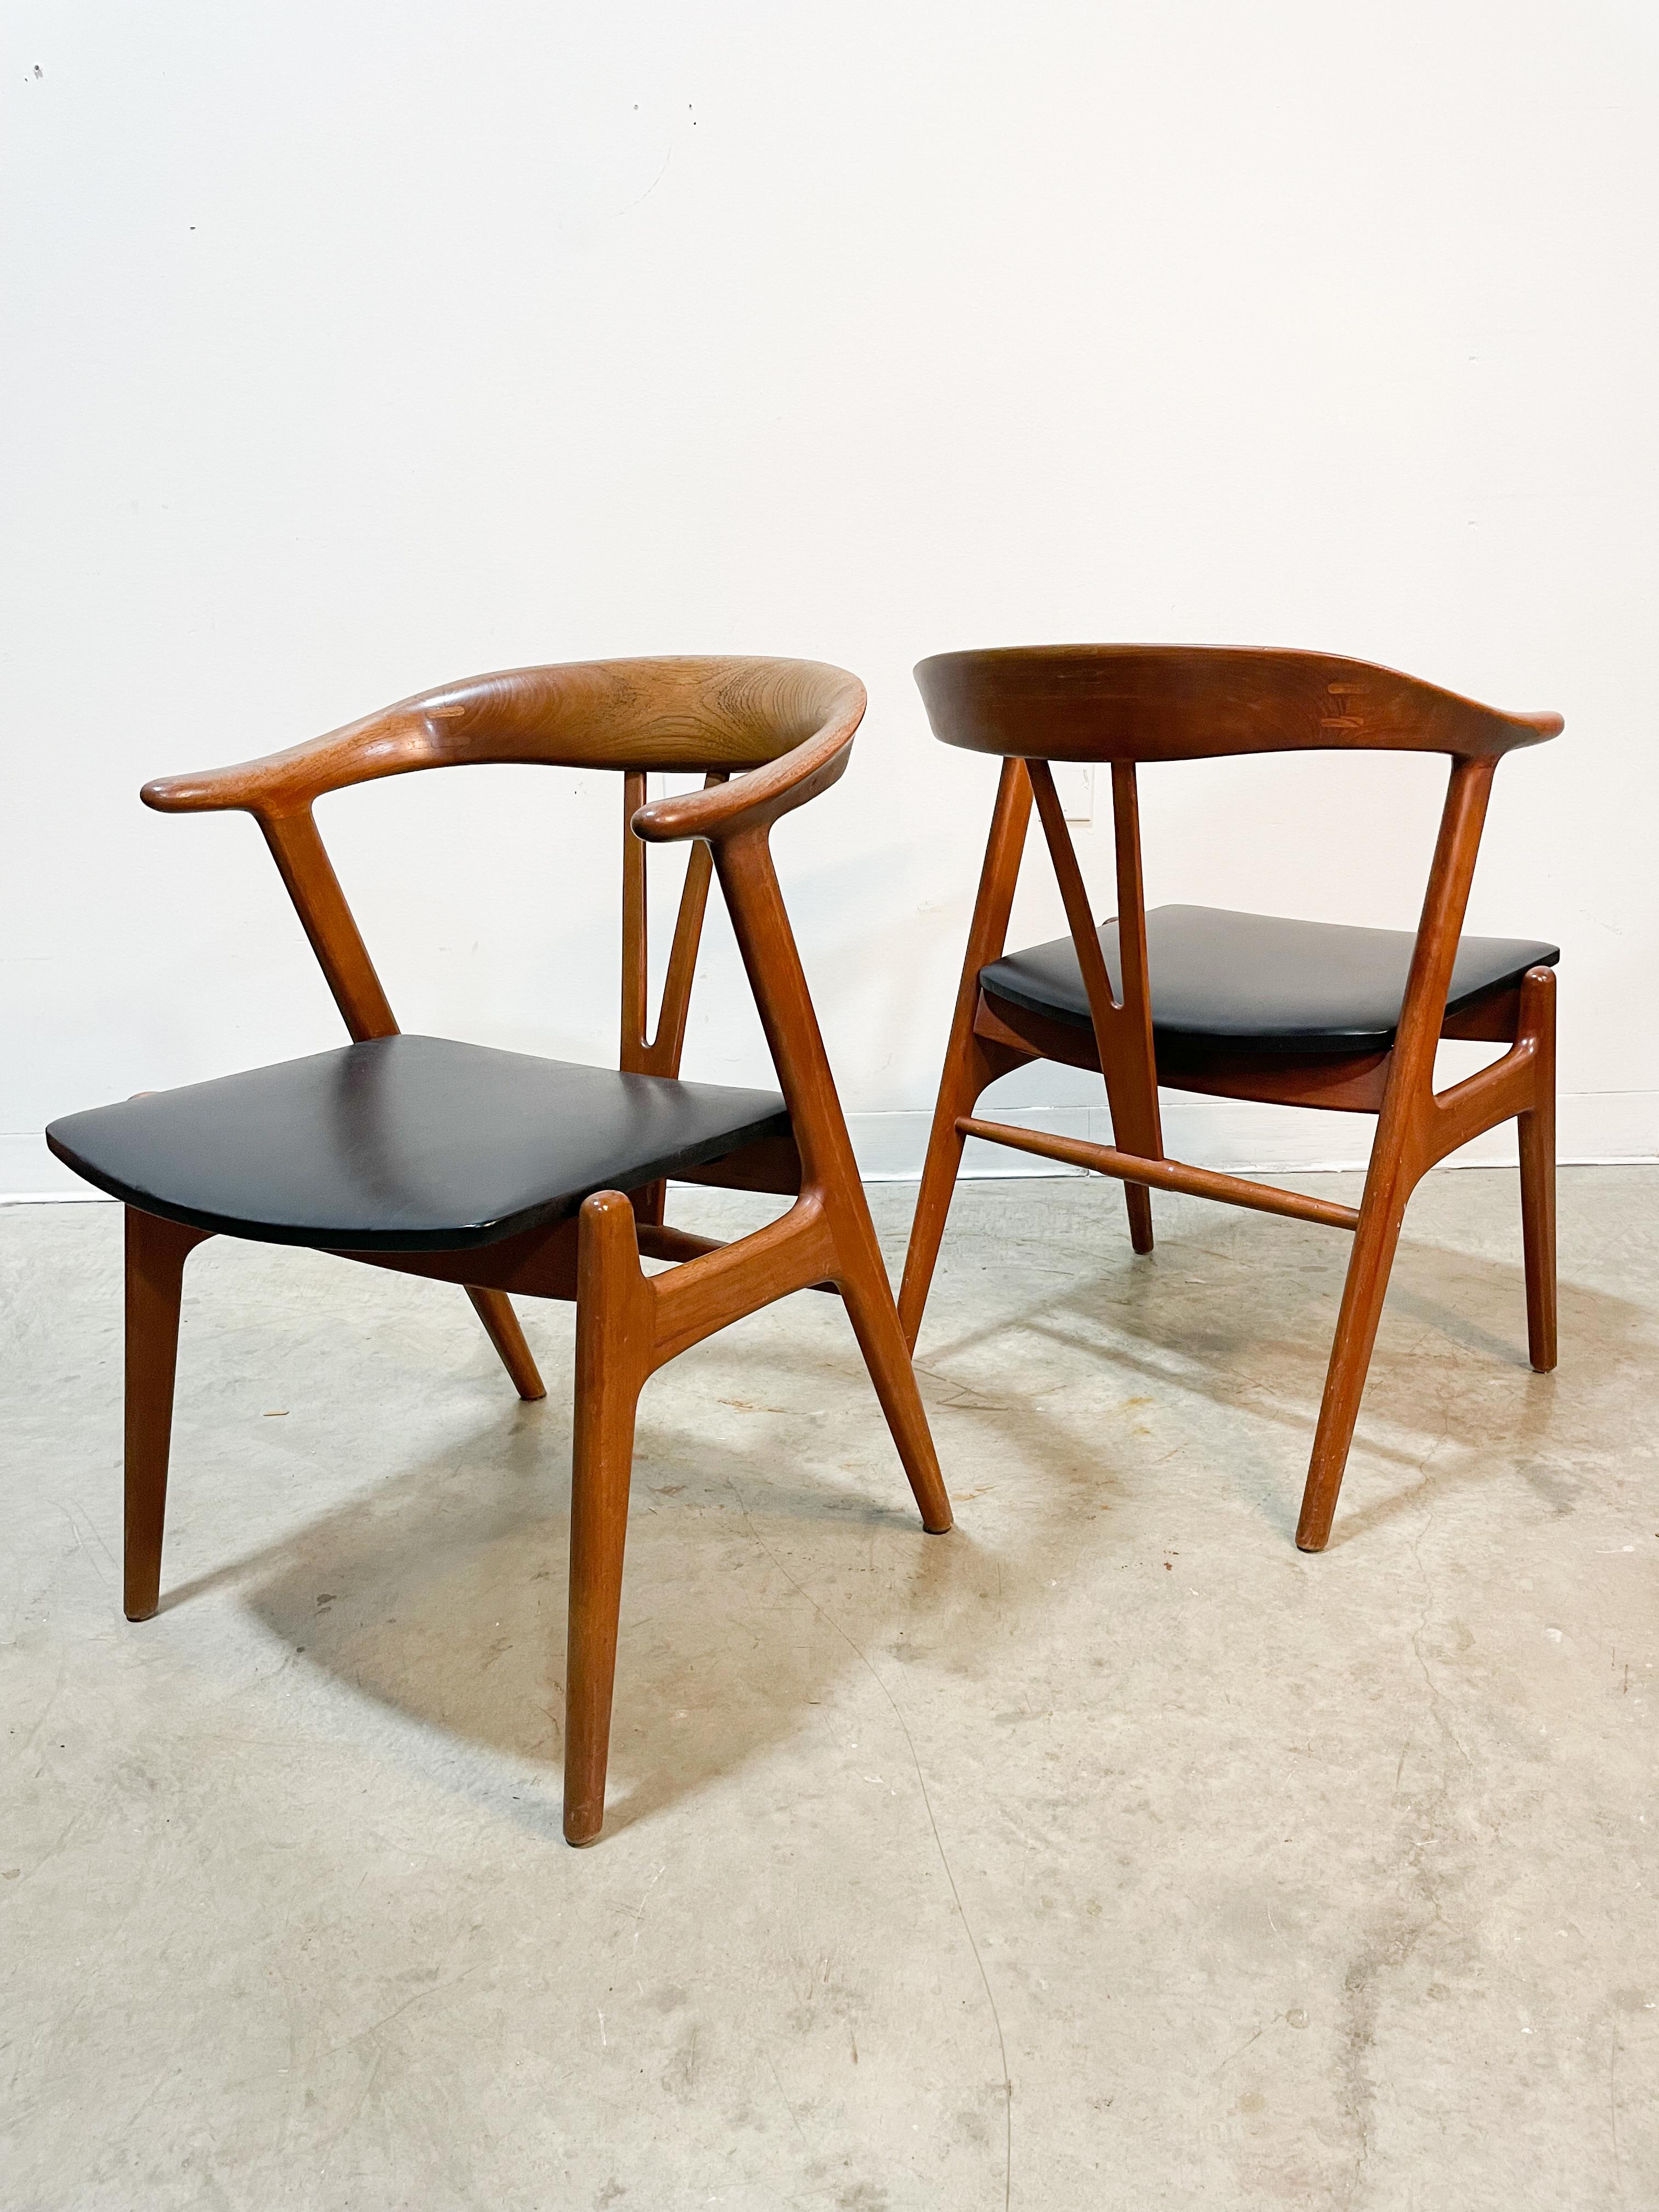 Superb teak dining chairs designed by Norwegian Tobjorn Afdal. Extremely comfortable with striking design elements - almost a hybrid of Hans Wegner's Wishbone and Round chairs. Very well made with distinctive inlays on the seat back joints. The